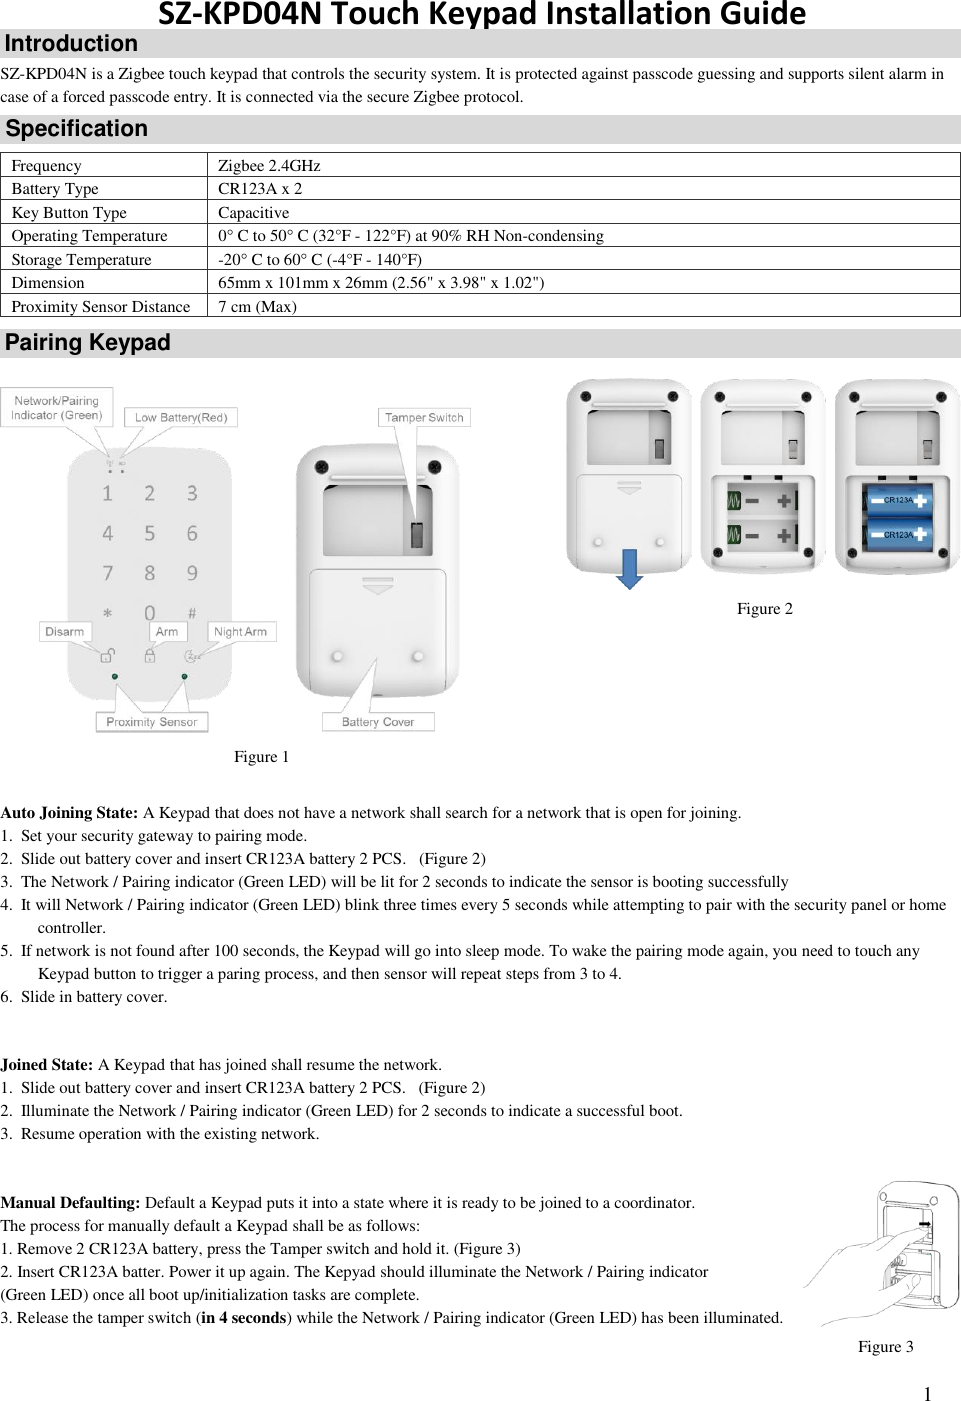   1 SZ-KPD04N Touch Keypad Installation Guide SZ-KPD04N is a Zigbee touch keypad that controls the security system. It is protected against passcode guessing and supports silent alarm in case of a forced passcode entry. It is connected via the secure Zigbee protocol.   Frequency Zigbee 2.4GHz Battery Type CR123A x 2  Key Button Type Capacitive Operating Temperature 0 C to 50 C (32°F - 122°F) at 90% RH Non-condensing Storage Temperature -20 C to 60 C (-4°F - 140°F)  Dimension 65mm x 101mm x 26mm (2.56&quot; x 3.98&quot; x 1.02&quot;) Proximity Sensor Distance 7 cm (Max)                       Auto Joining State: A Keypad that does not have a network shall search for a network that is open for joining. 1. Set your security gateway to pairing mode. 2. Slide out battery cover and insert CR123A battery 2 PCS.   (Figure 2) 3. The Network / Pairing indicator (Green LED) will be lit for 2 seconds to indicate the sensor is booting successfully  4. It will Network / Pairing indicator (Green LED) blink three times every 5 seconds while attempting to pair with the security panel or home controller. 5. If network is not found after 100 seconds, the Keypad will go into sleep mode. To wake the pairing mode again, you need to touch any Keypad button to trigger a paring process, and then sensor will repeat steps from 3 to 4. 6. Slide in battery cover.   Joined State: A Keypad that has joined shall resume the network.  1. Slide out battery cover and insert CR123A battery 2 PCS.   (Figure 2) 2. Illuminate the Network / Pairing indicator (Green LED) for 2 seconds to indicate a successful boot.  3. Resume operation with the existing network.    Manual Defaulting: Default a Keypad puts it into a state where it is ready to be joined to a coordinator.  The process for manually default a Keypad shall be as follows:  1. Remove 2 CR123A battery, press the Tamper switch and hold it. (Figure 3) 2. Insert CR123A batter. Power it up again. The Kepyad should illuminate the Network / Pairing indicator  (Green LED) once all boot up/initialization tasks are complete.  3. Release the tamper switch (in 4 seconds) while the Network / Pairing indicator (Green LED) has been illuminated.  Introduction Specification Pairing Keypad Figure 1 Figure 2 Figure 3 